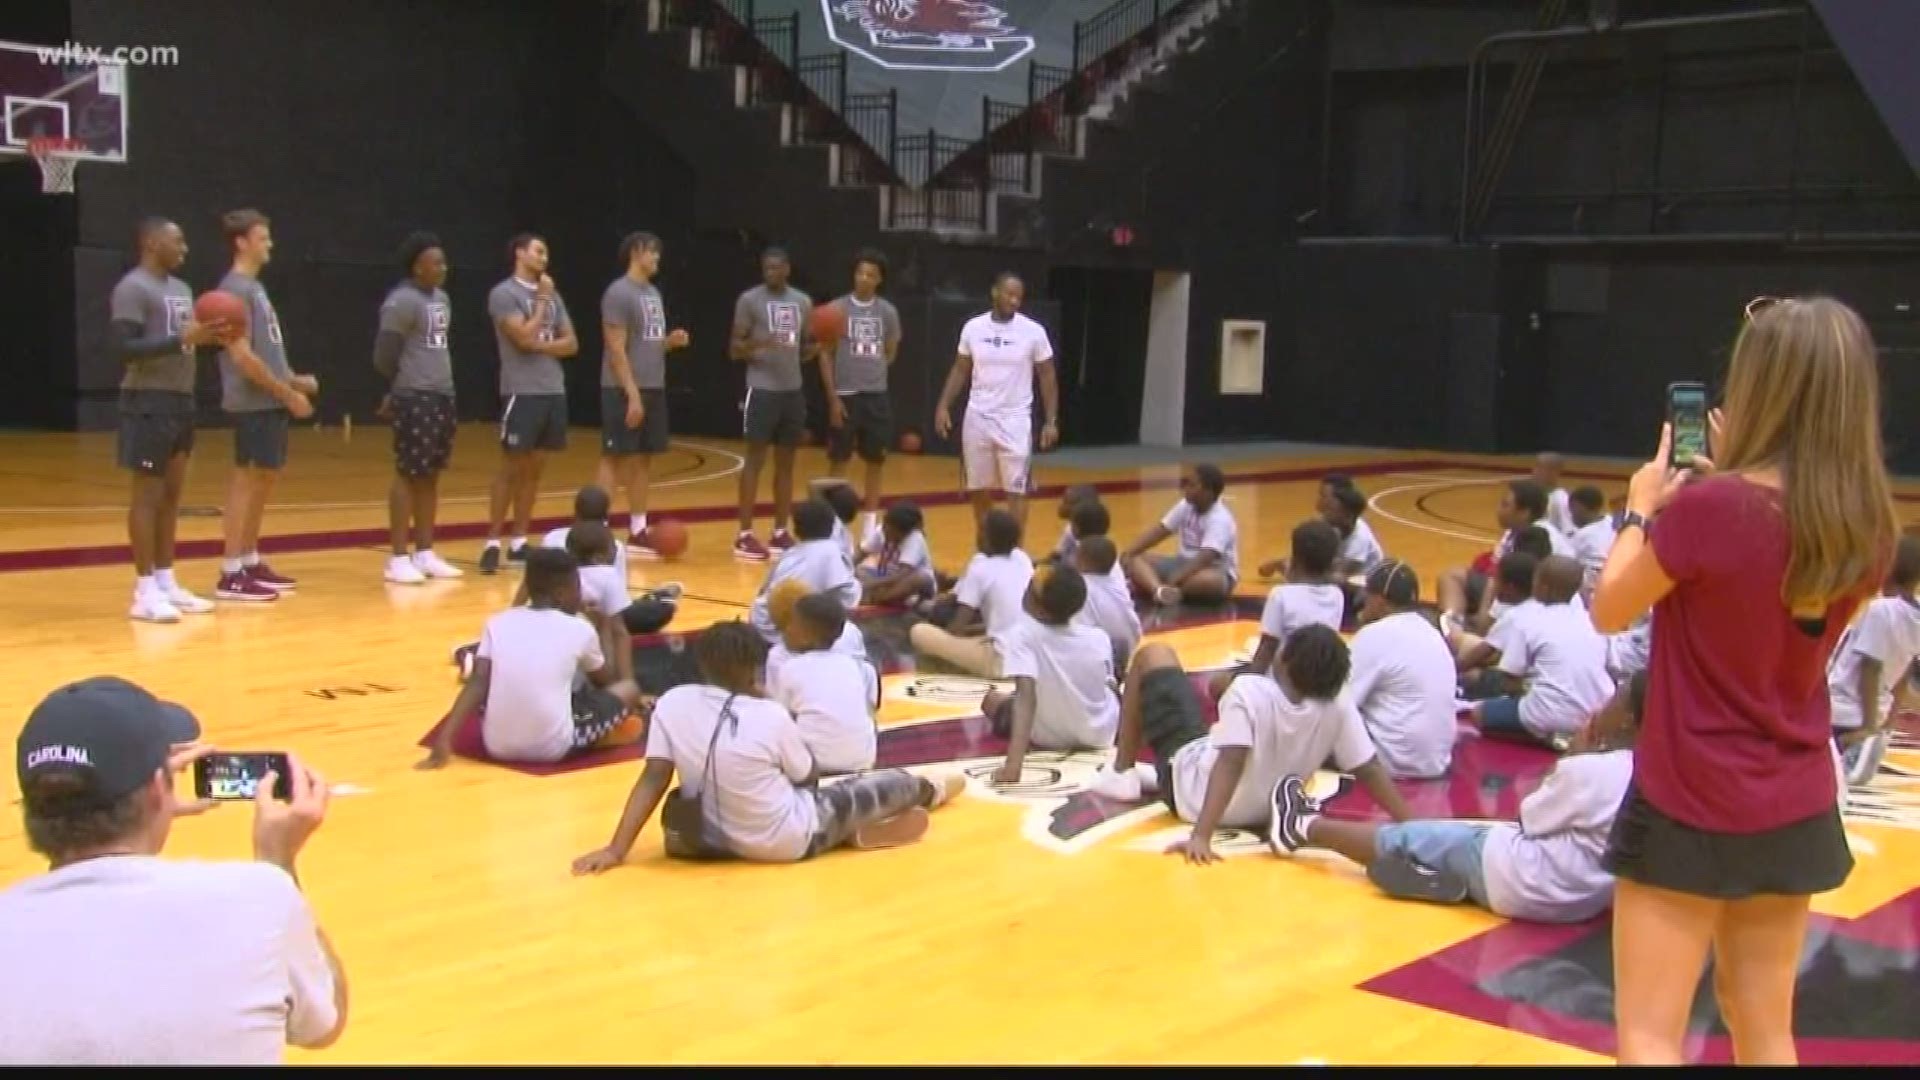 The kids came to the USC men's basketball team as the players got a break from traveling around the community but not from giving back. The plan is for the effect of these kinds of interactions to pay off now and in the future for these kids.